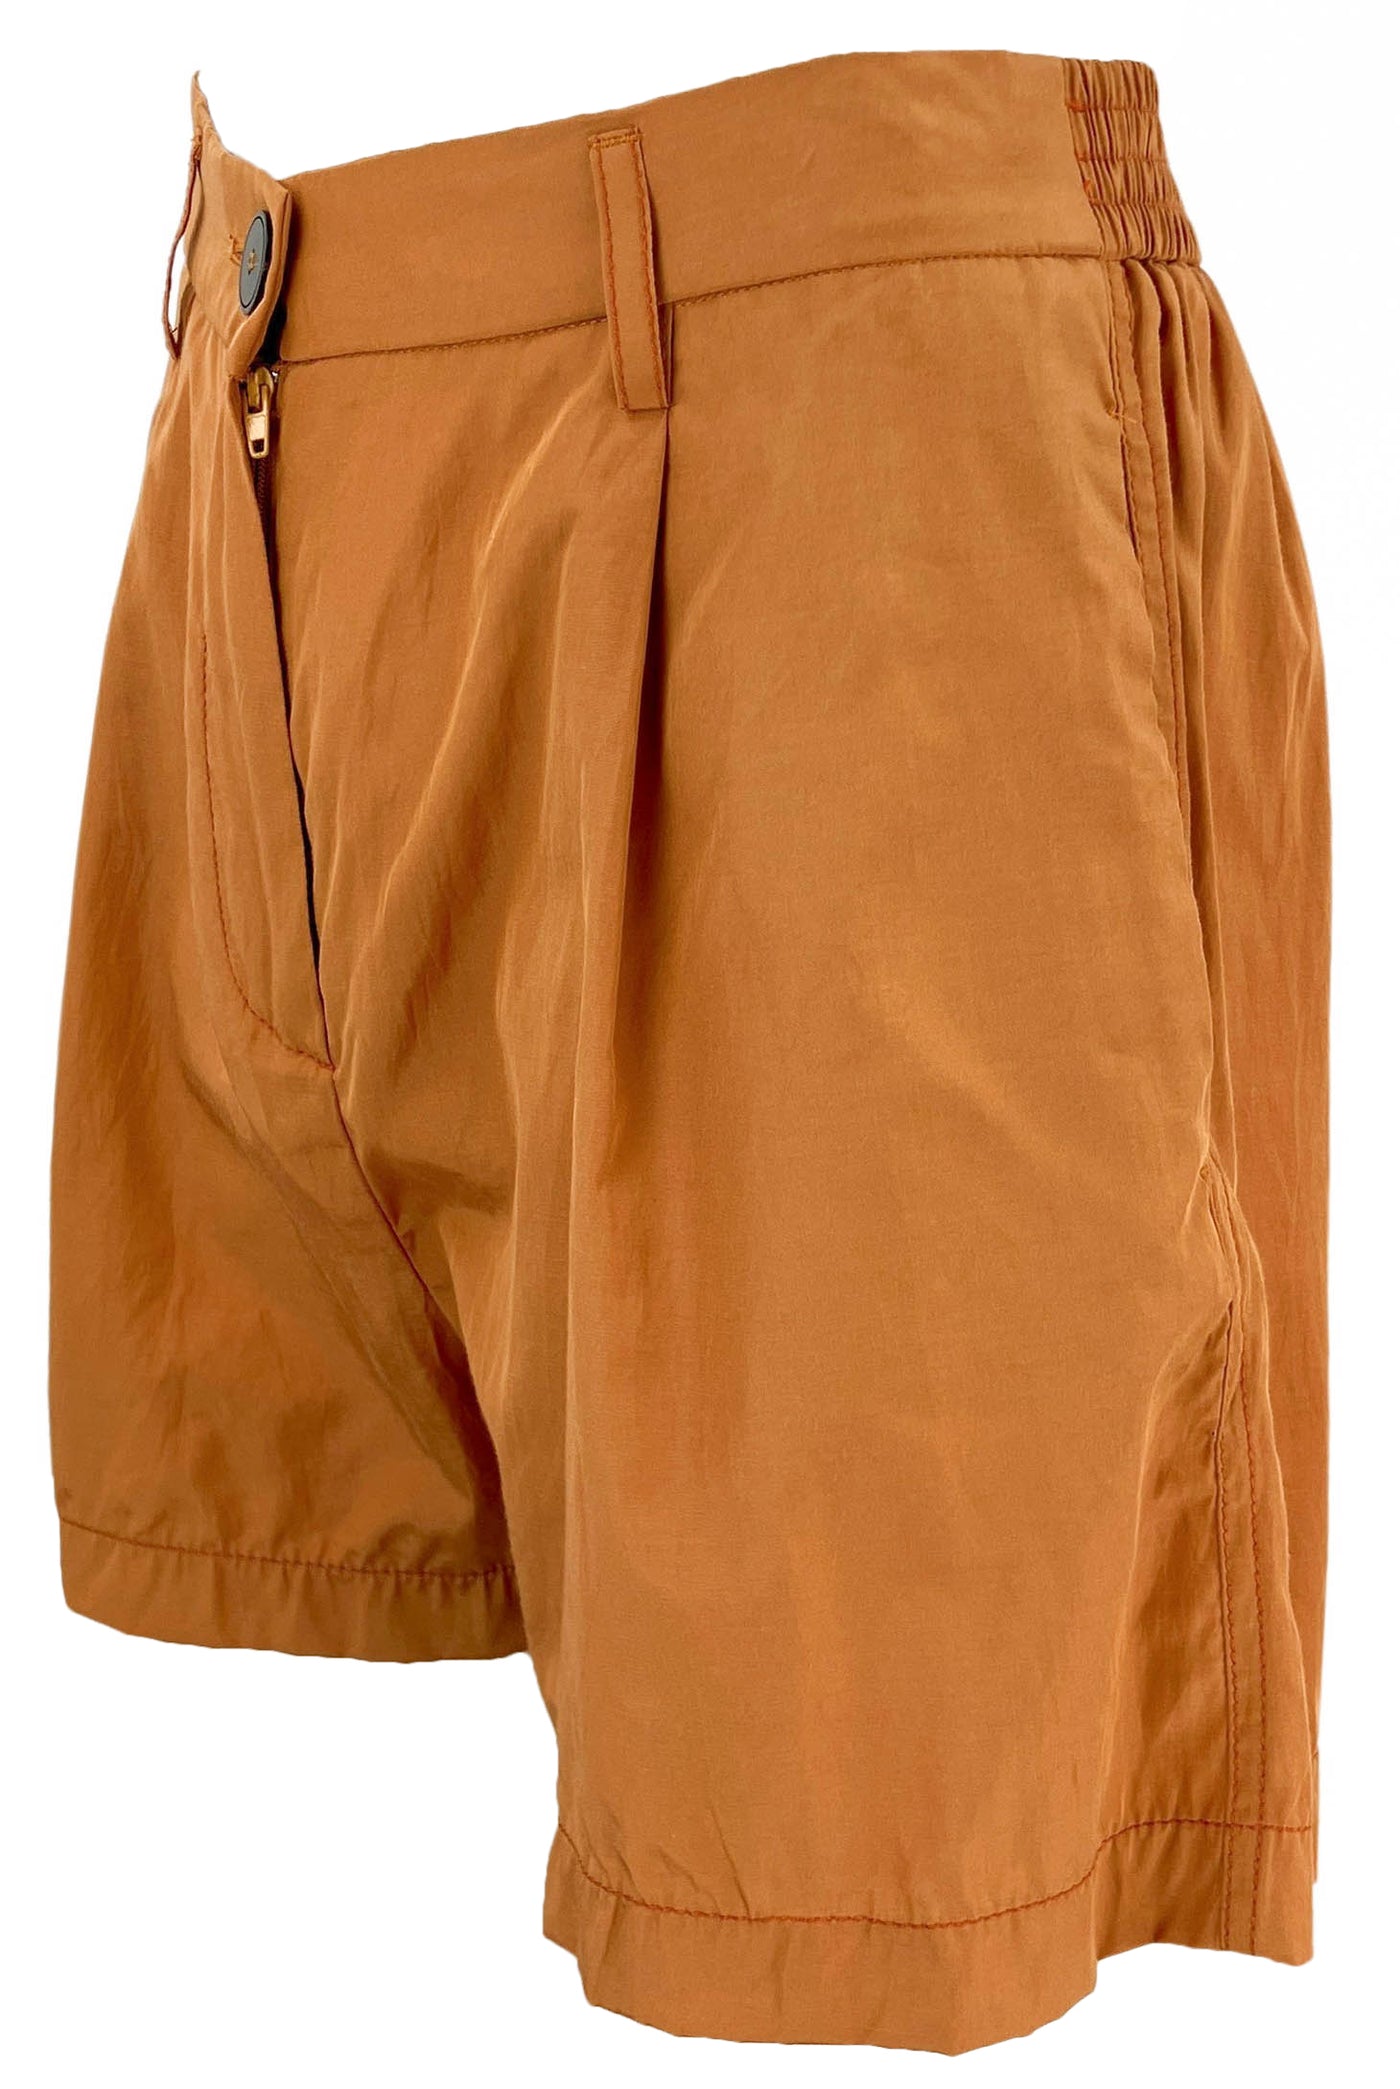 forte_forte High-Rise Shorts in Bronze - Discounts on Forte_Forte at UAL